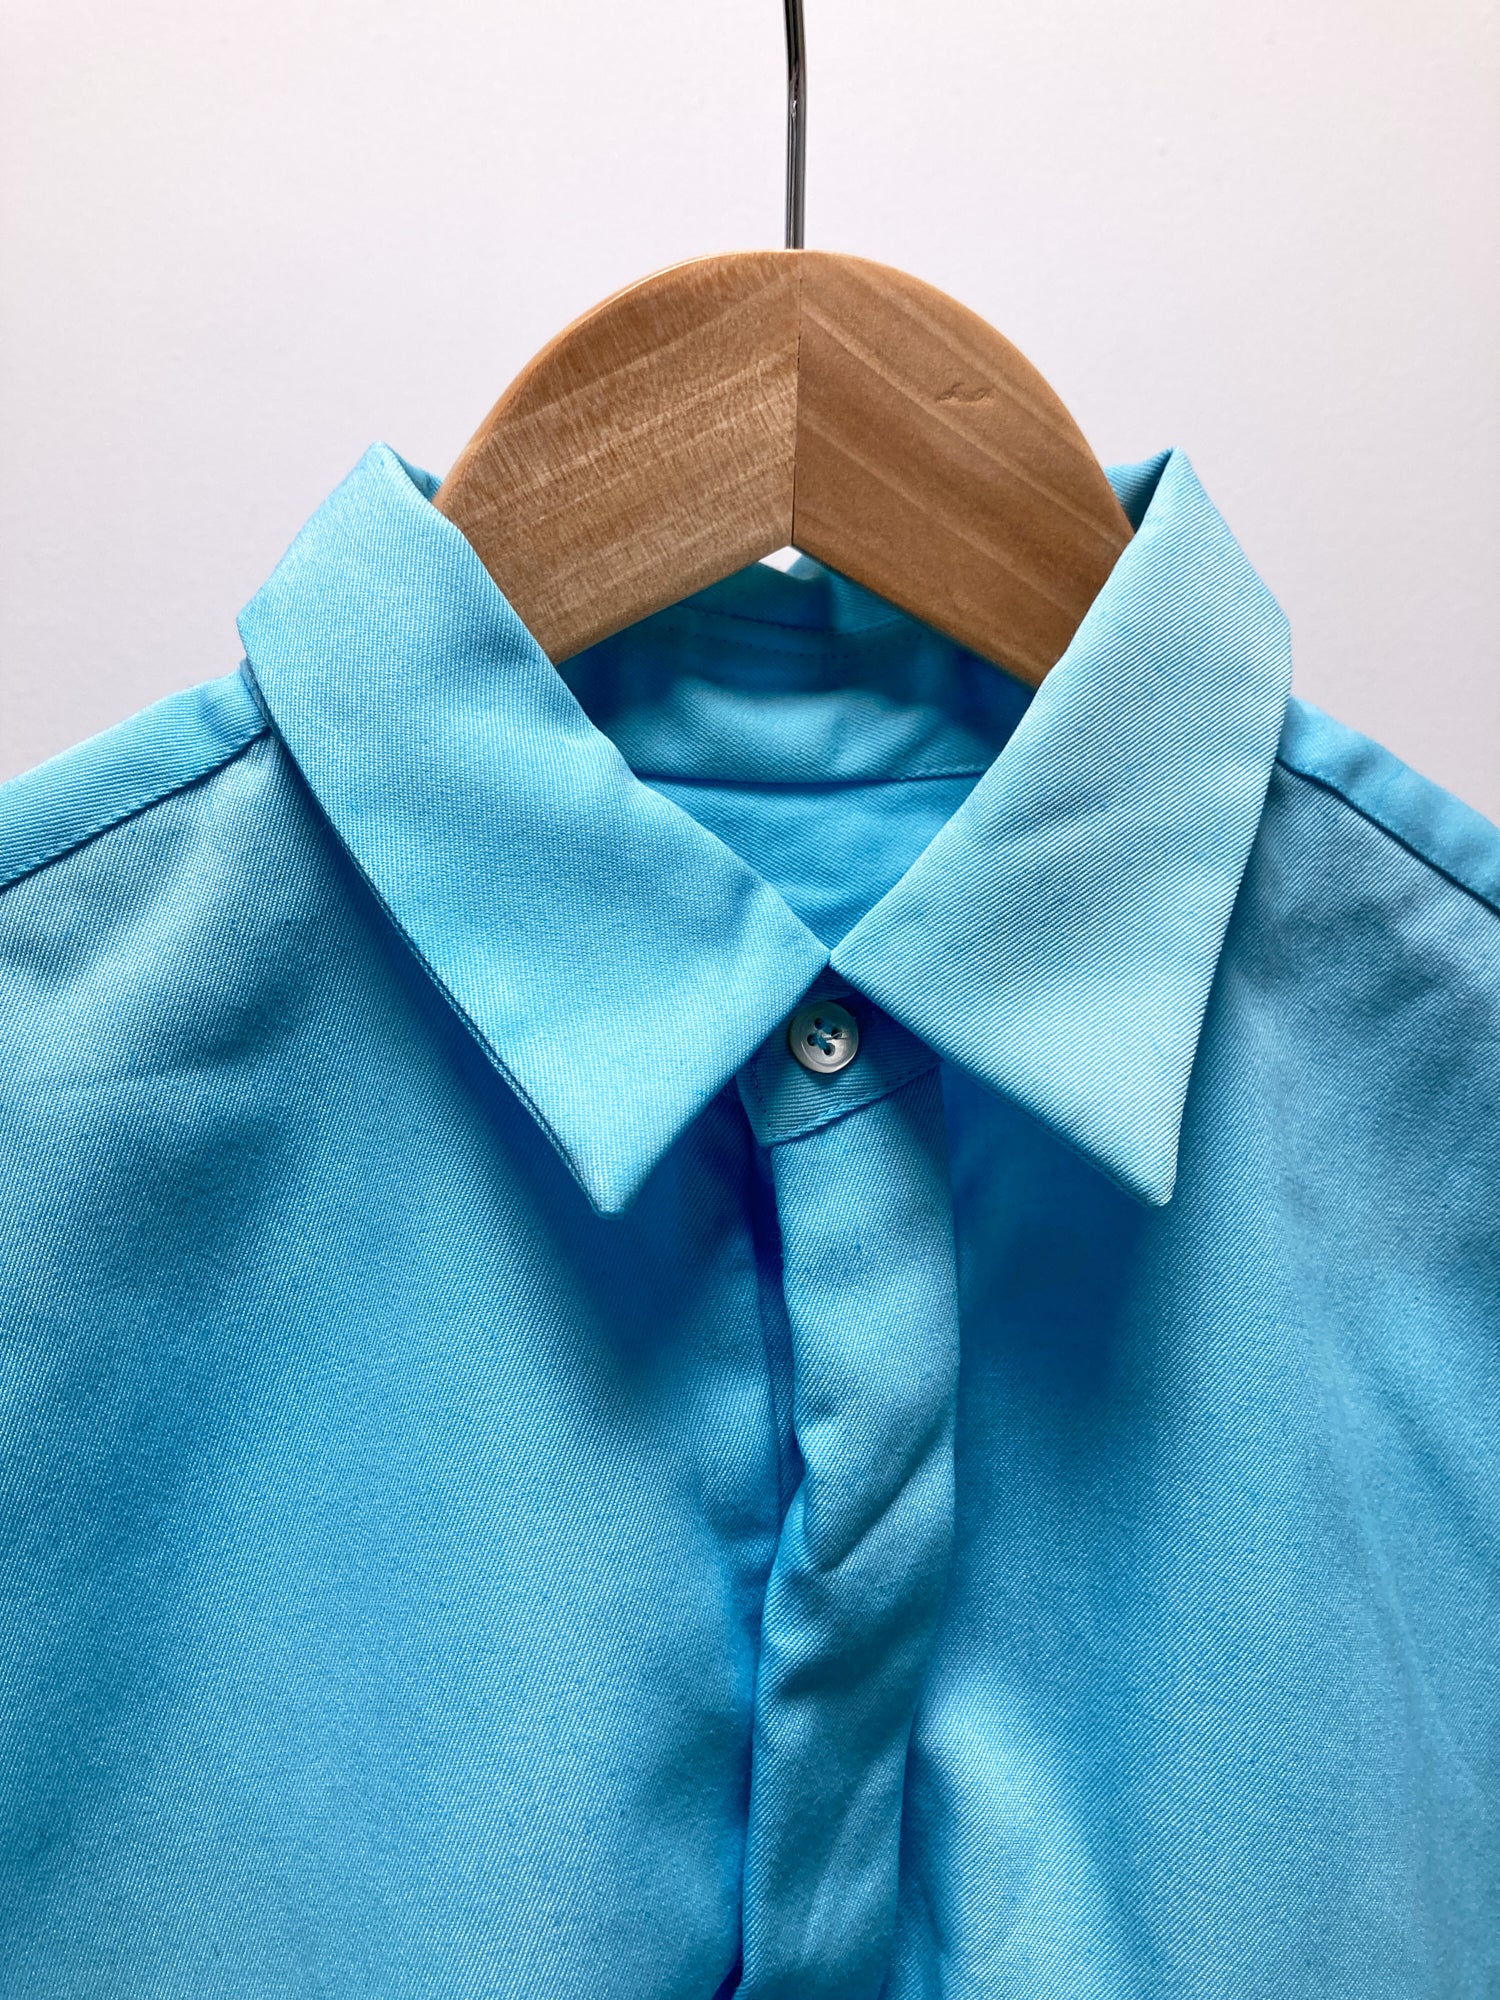 Comme des Garcons AW1995 "Sweeter than Sweet" blue pullover shirt